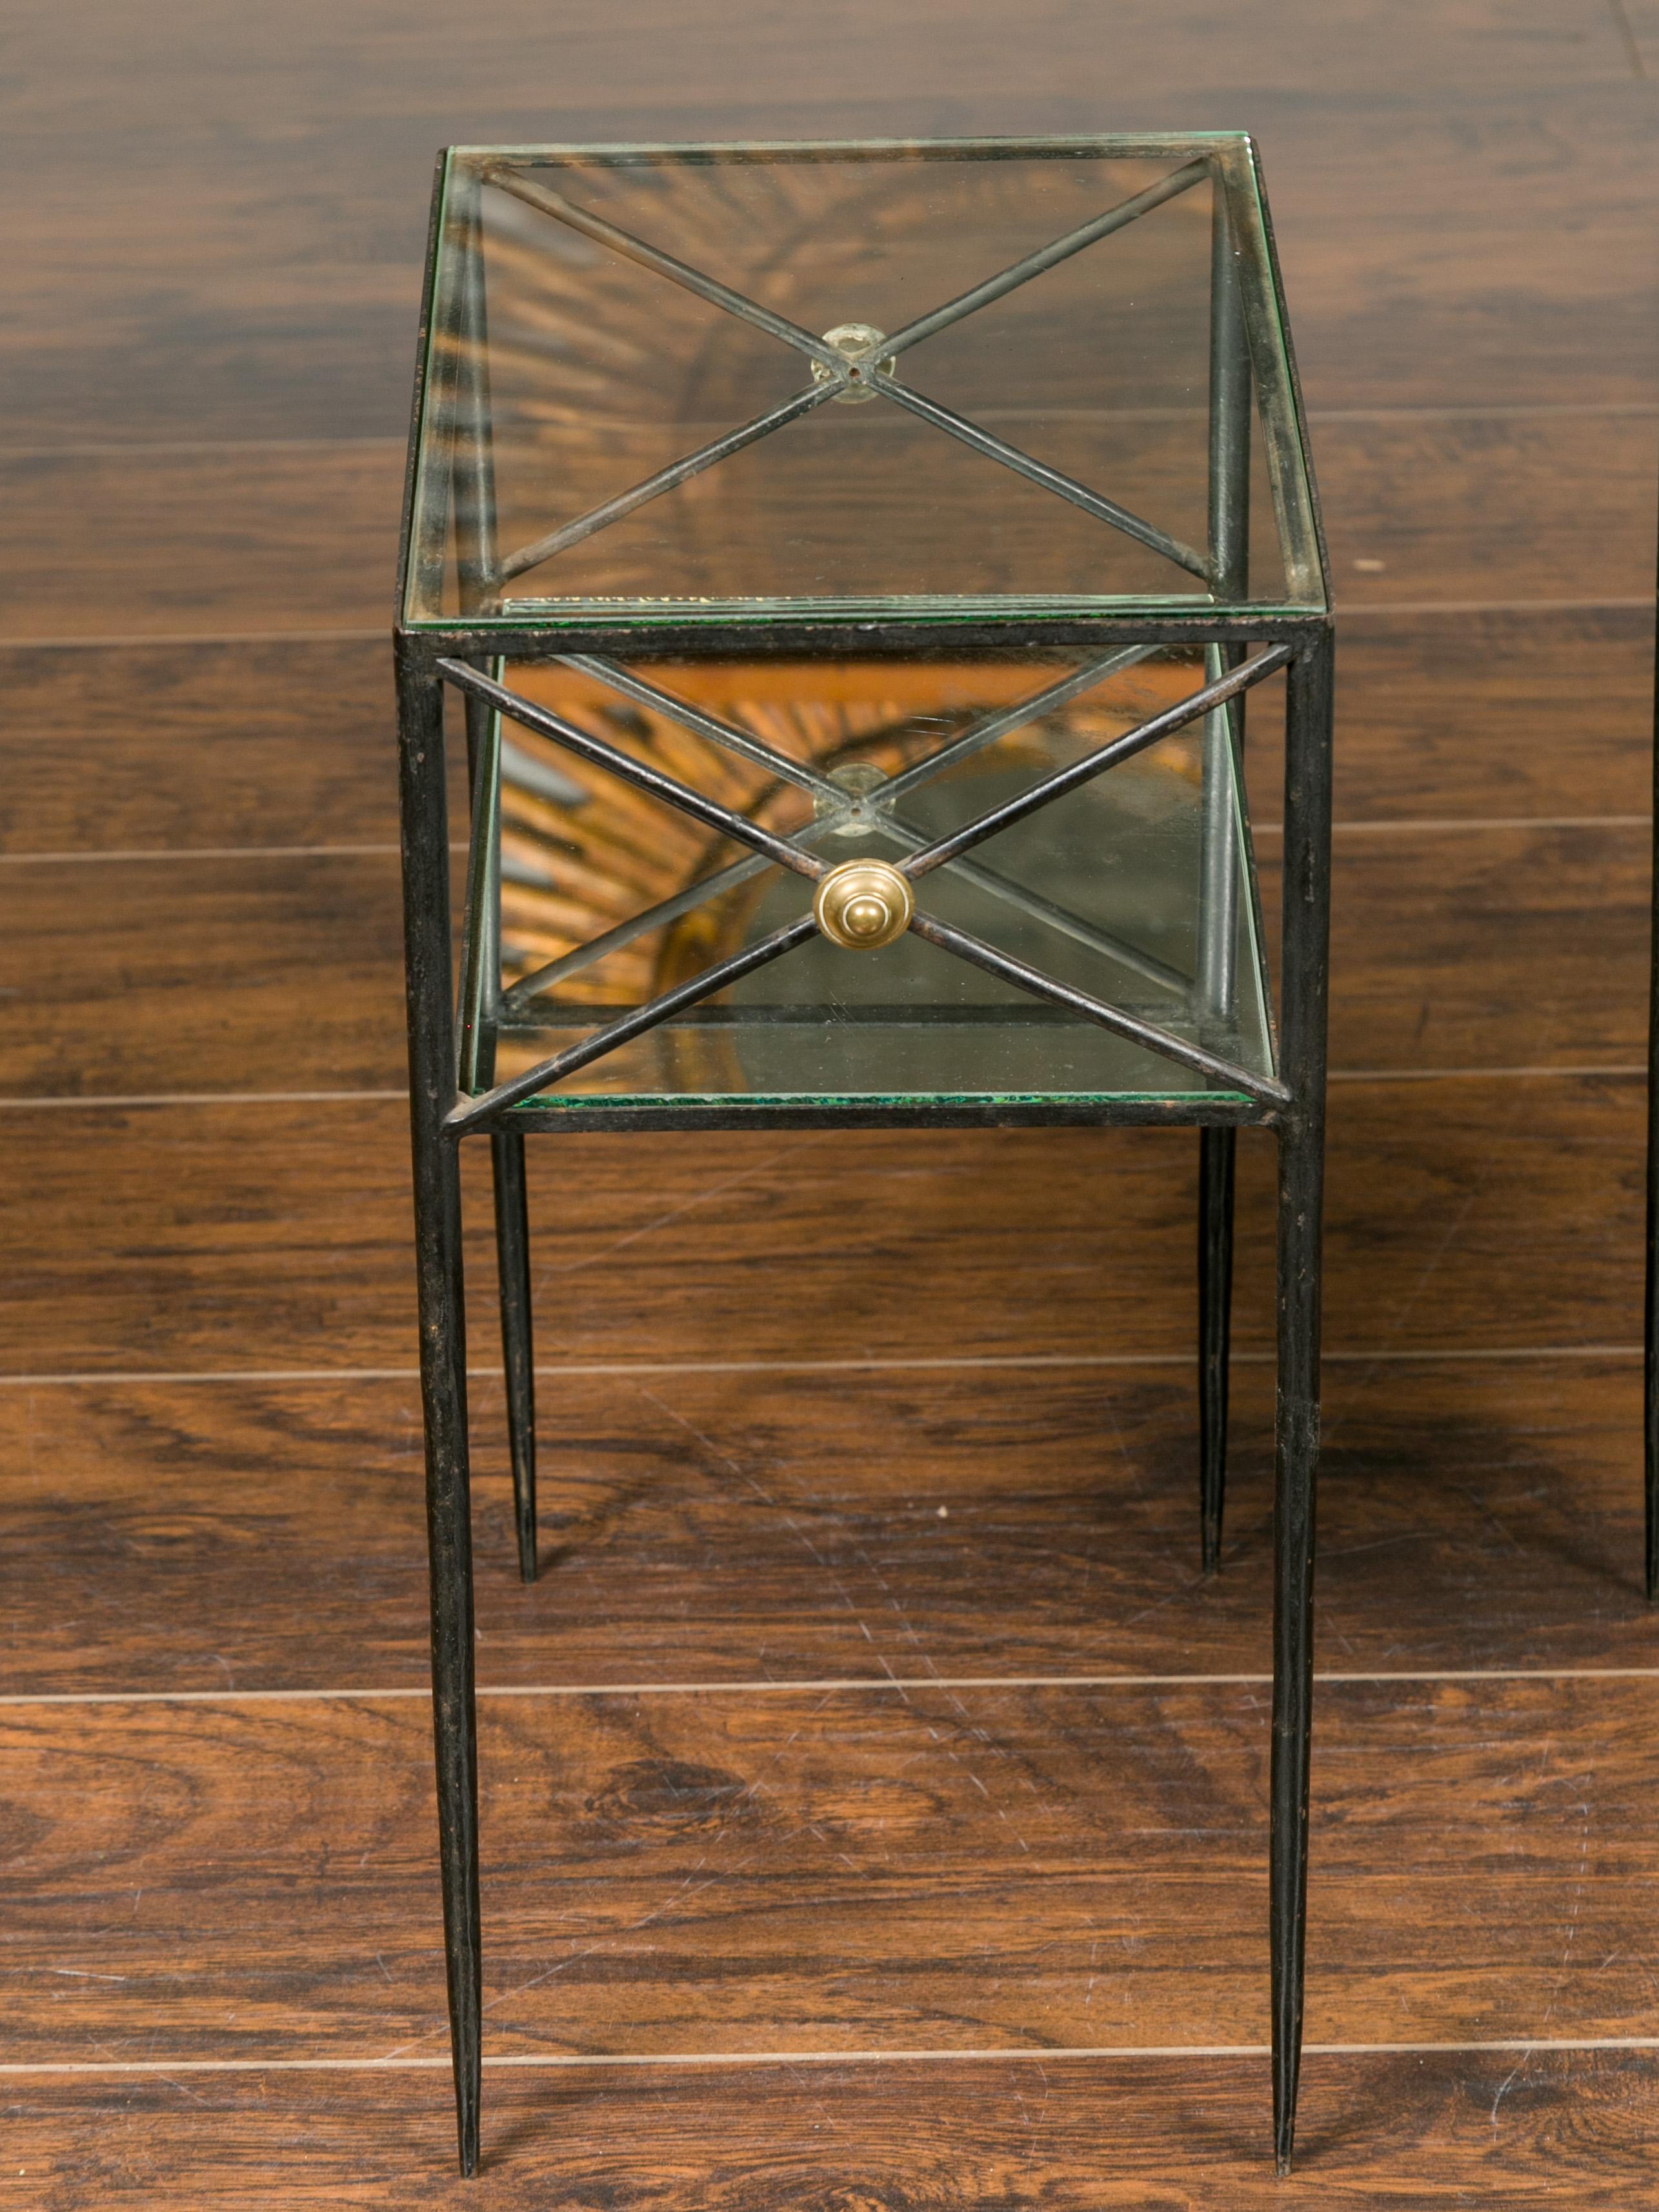 Pair of French Midcentury Iron and Brass Tables with Glass Top, Mirrored Shelf 6